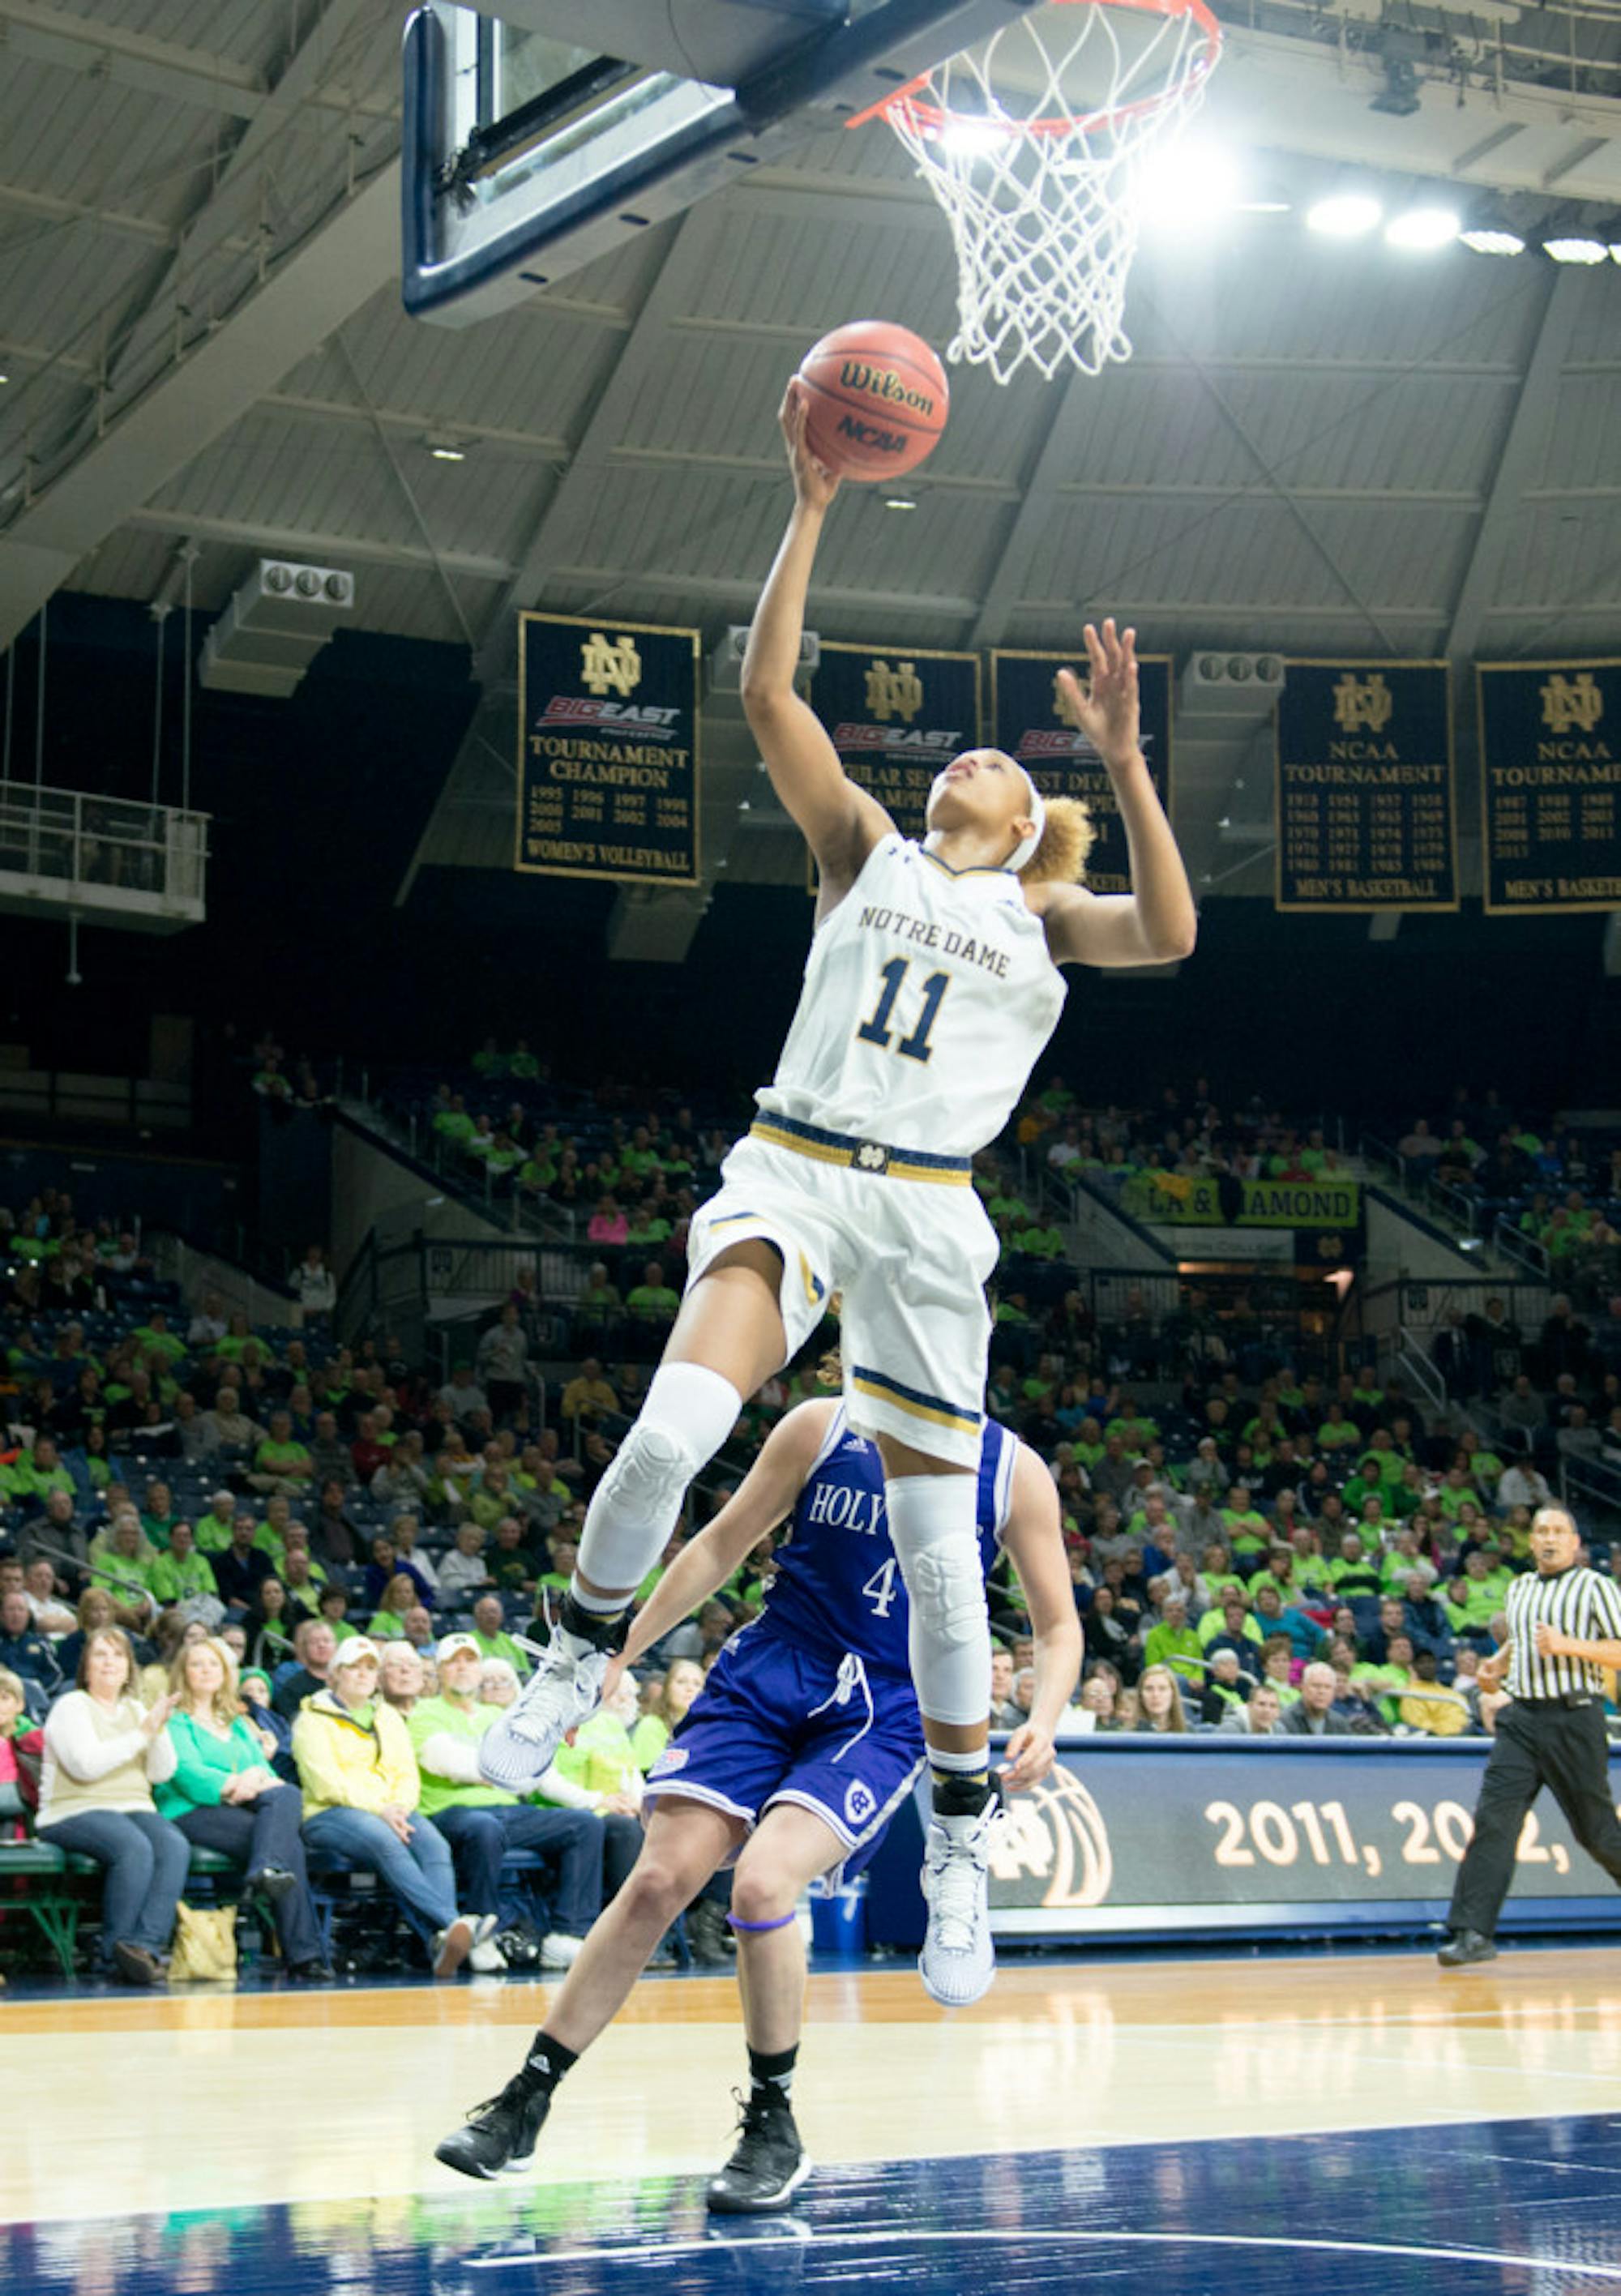 Irish freshman forward Brianna Turner lays the ball in during Notre Dame’s 104-29 win over Holy Cross on Nov. 23.